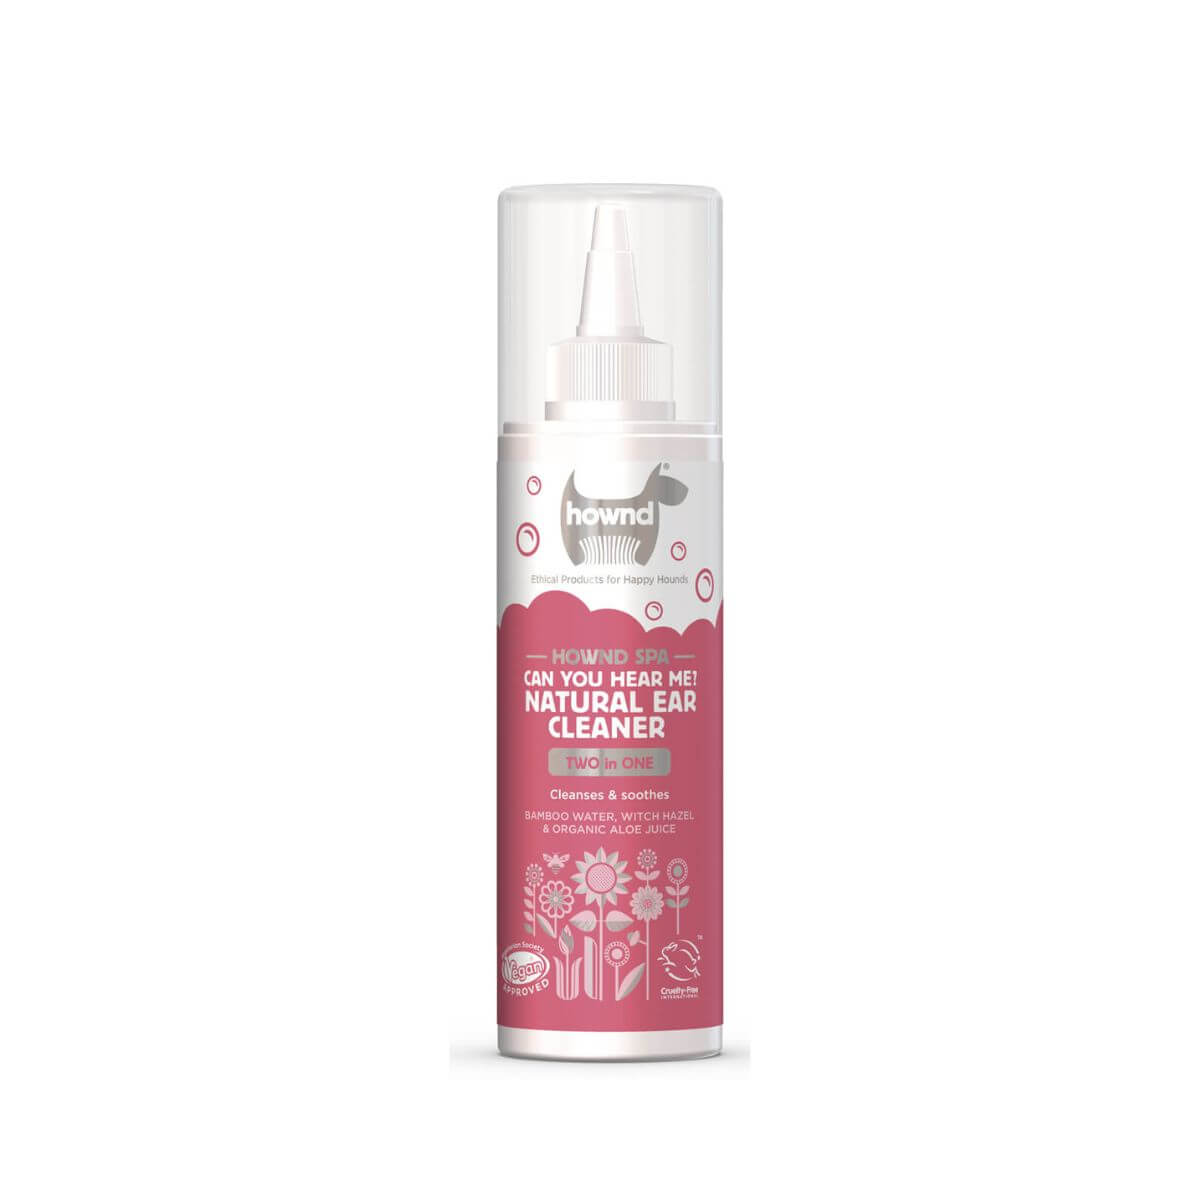 Can You Hear Me? Natural Ear Cleaner (250ml) x 4 - Hownd